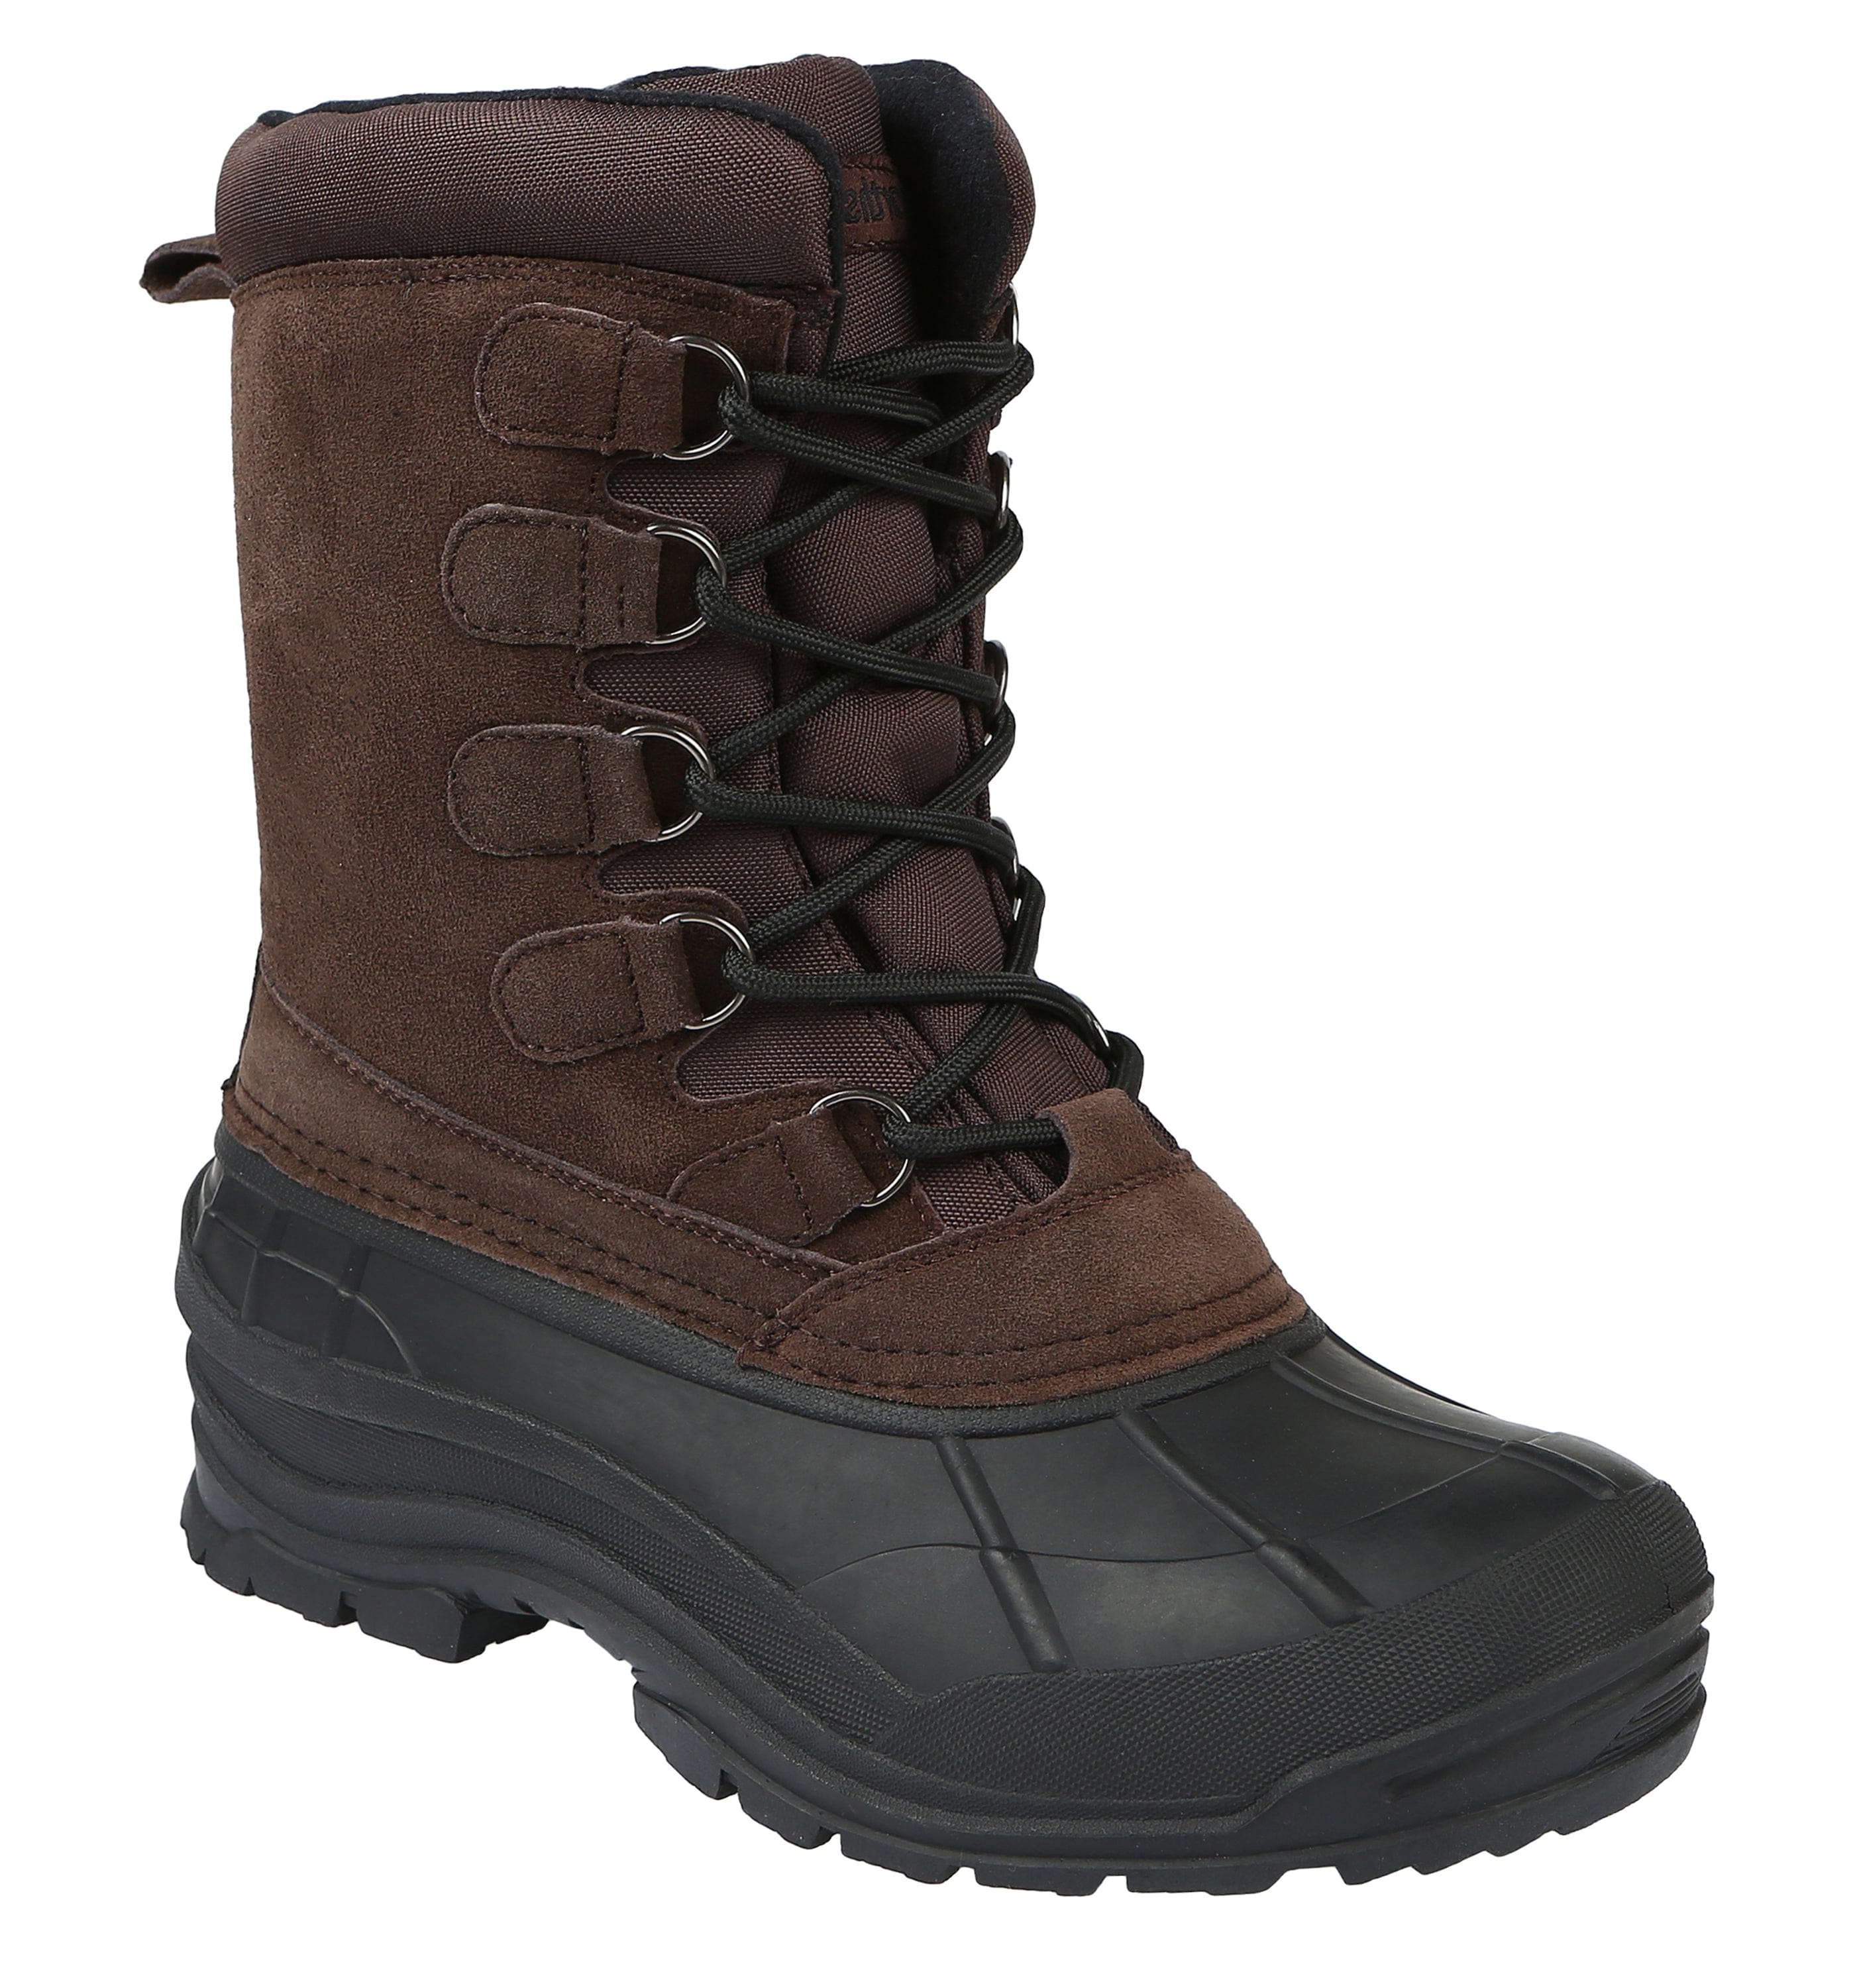 Men's Timber Crest Insulated Winter Snow Boot - Northside USA